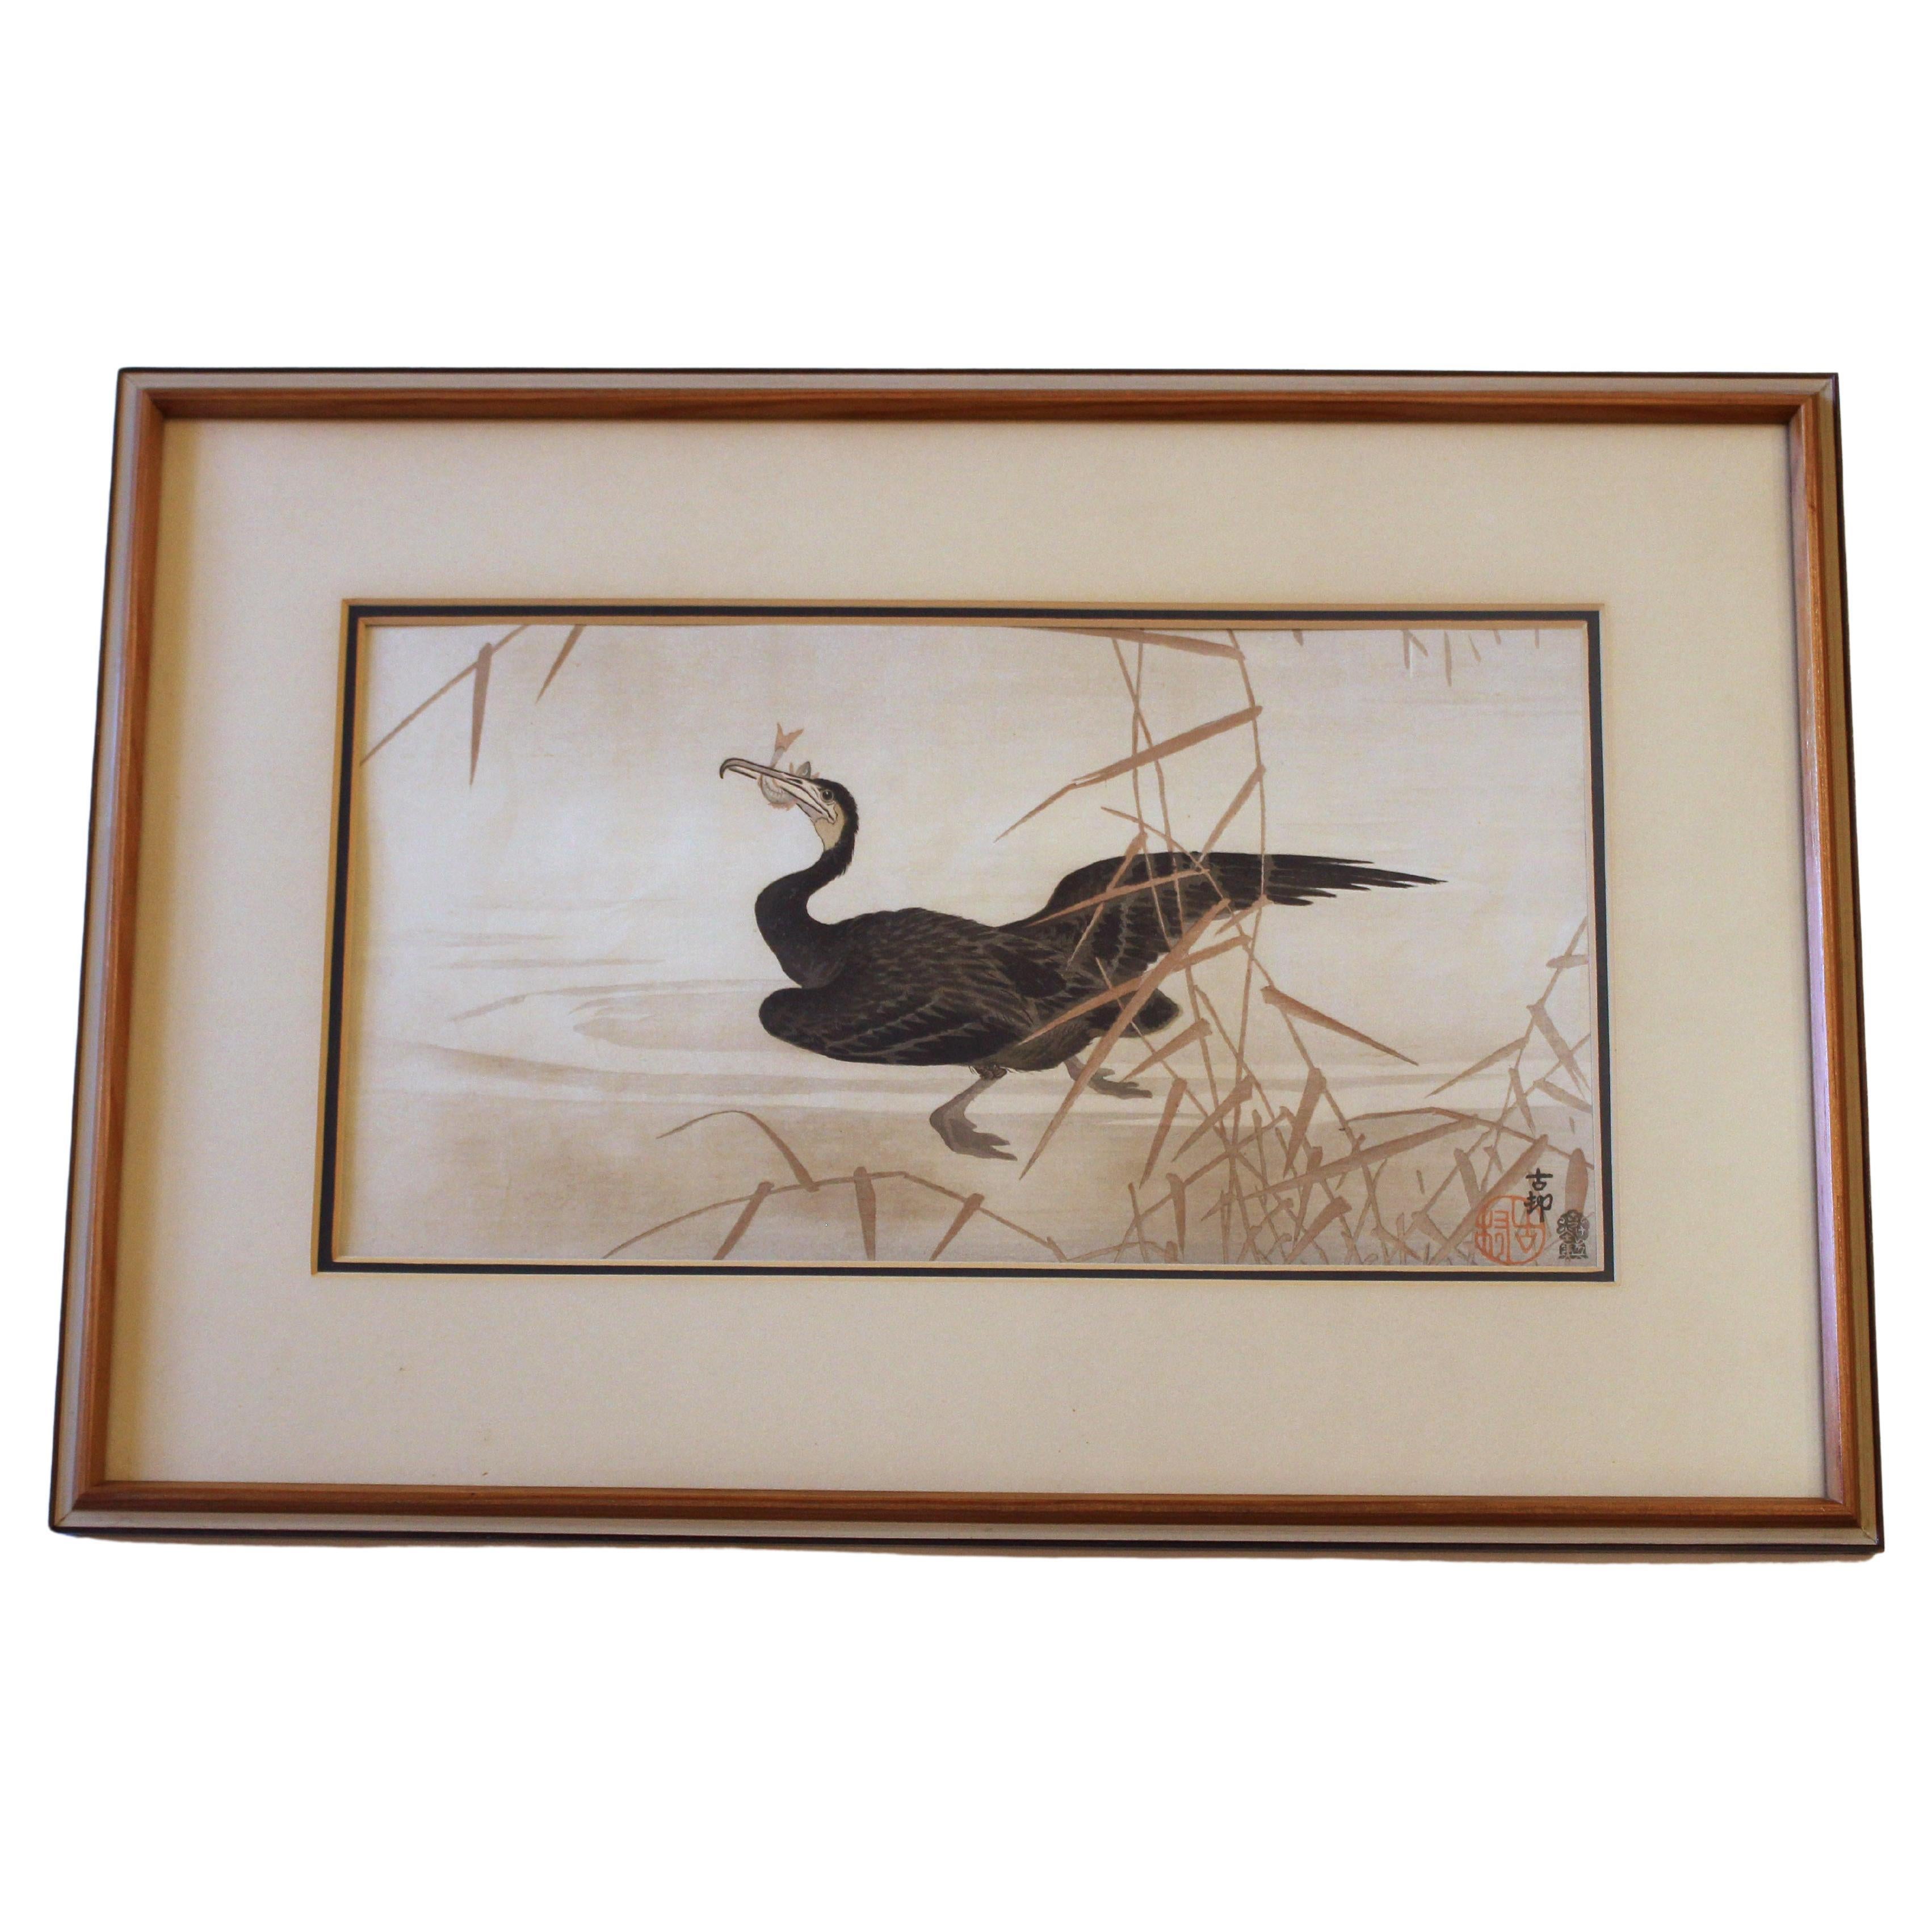 c. 1920s "Cormorant with Fish" by Ohara Koson For Sale